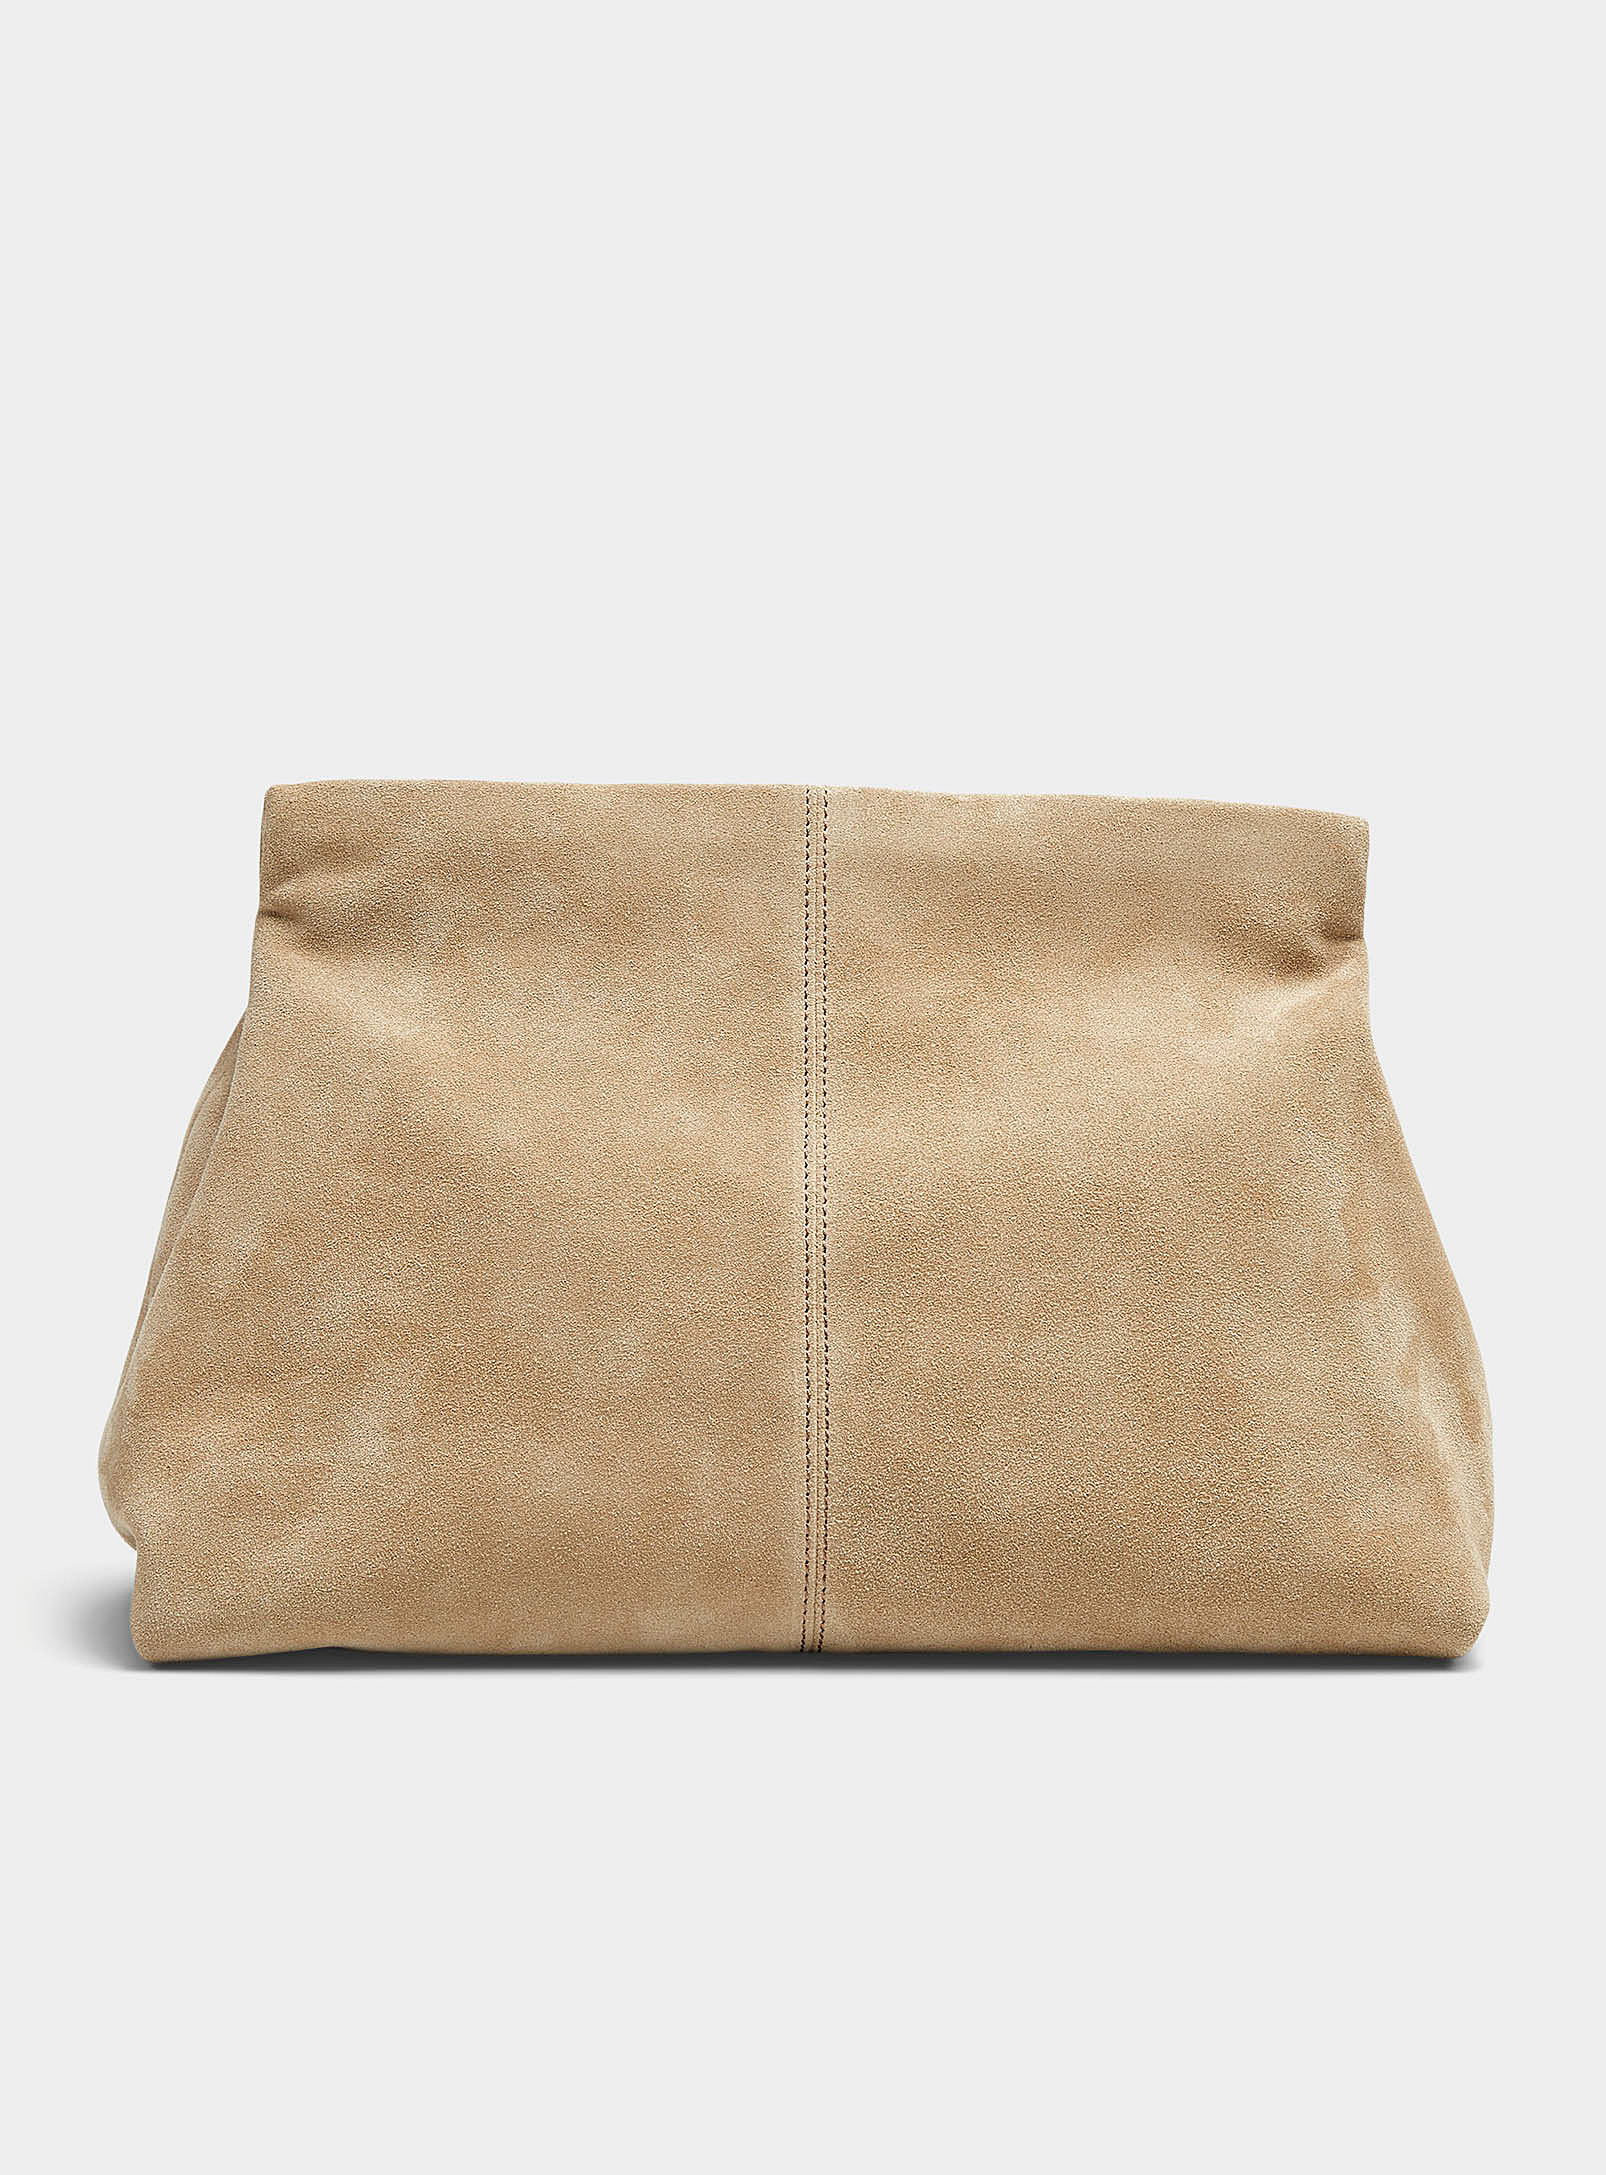 Flattered - Women's Clay taupe suede XL clutch